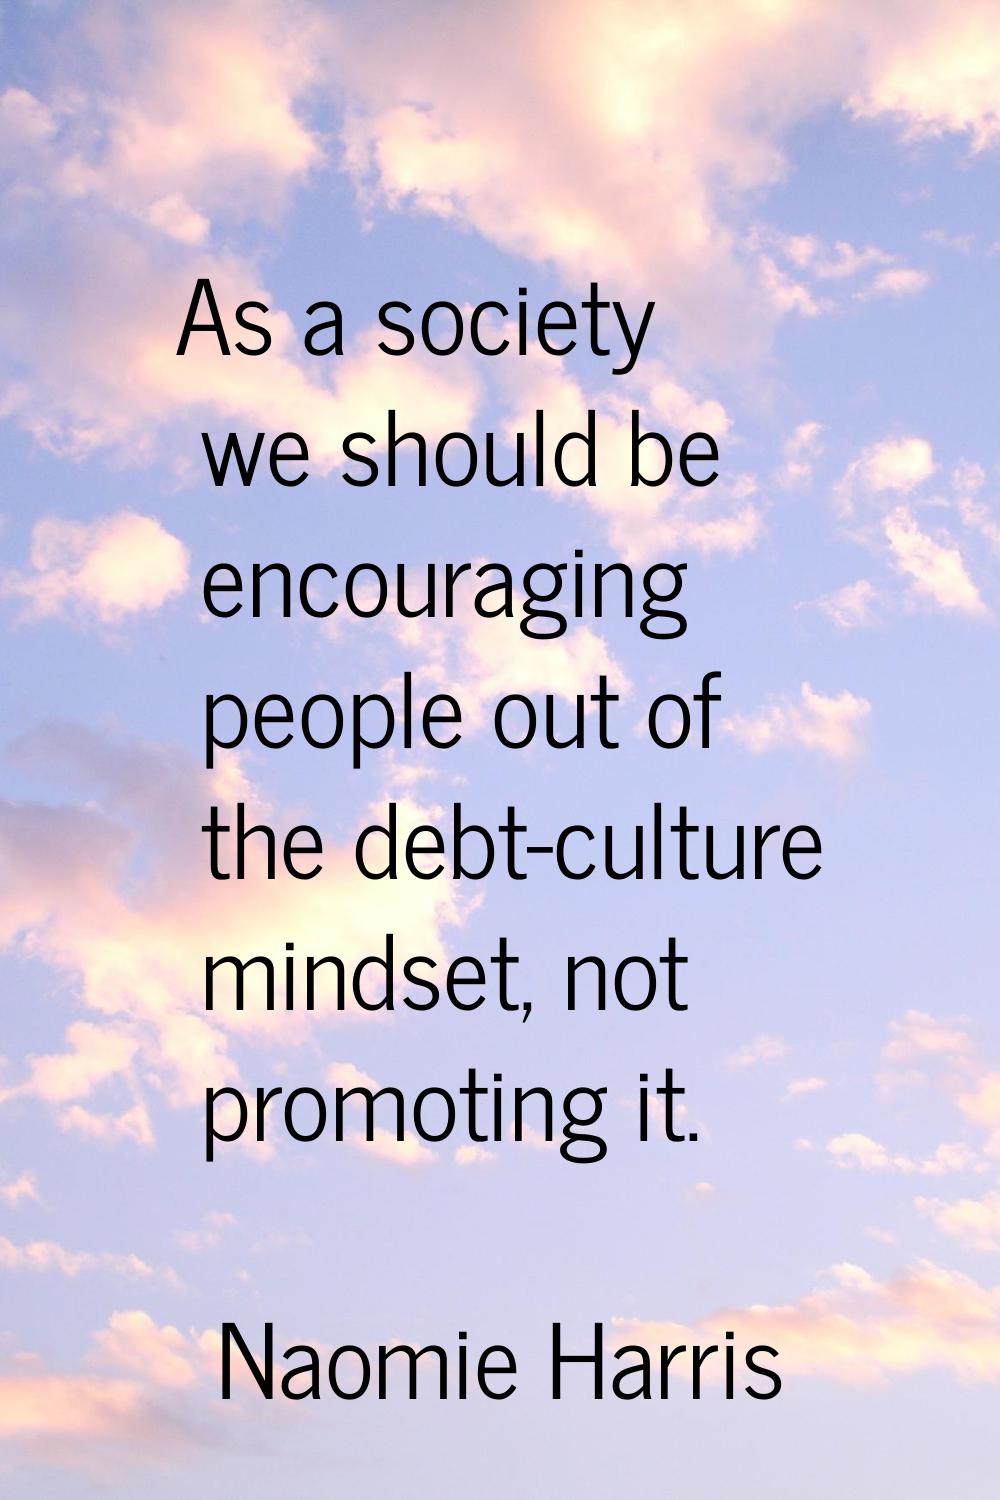 As a society we should be encouraging people out of the debt-culture mindset, not promoting it.